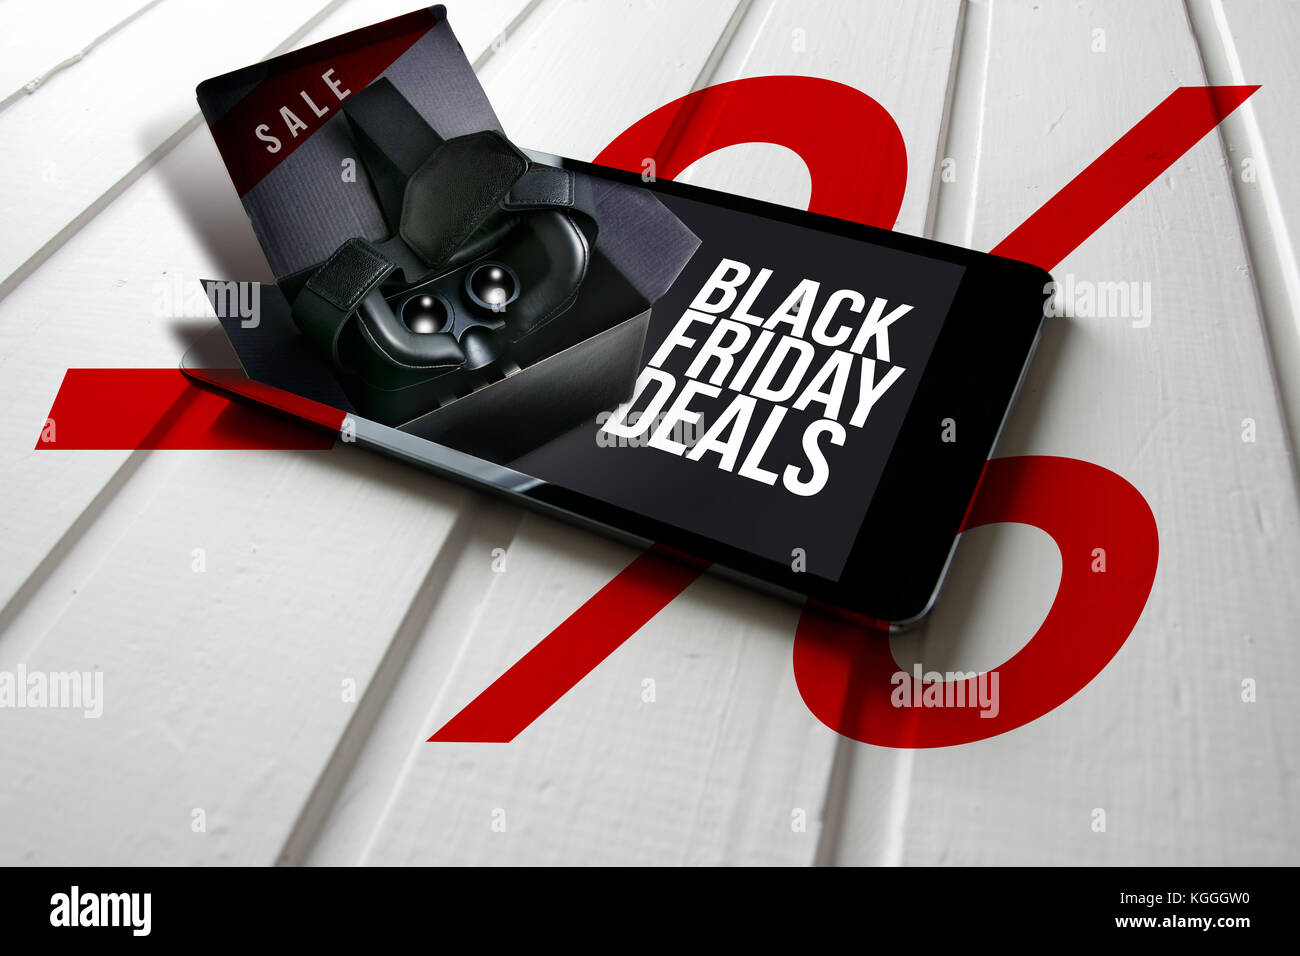 Black friday deals, promotion on computer tablet screen, box with virtual reality glasses come out of the tablet screen. Conceptual image Stock Photo